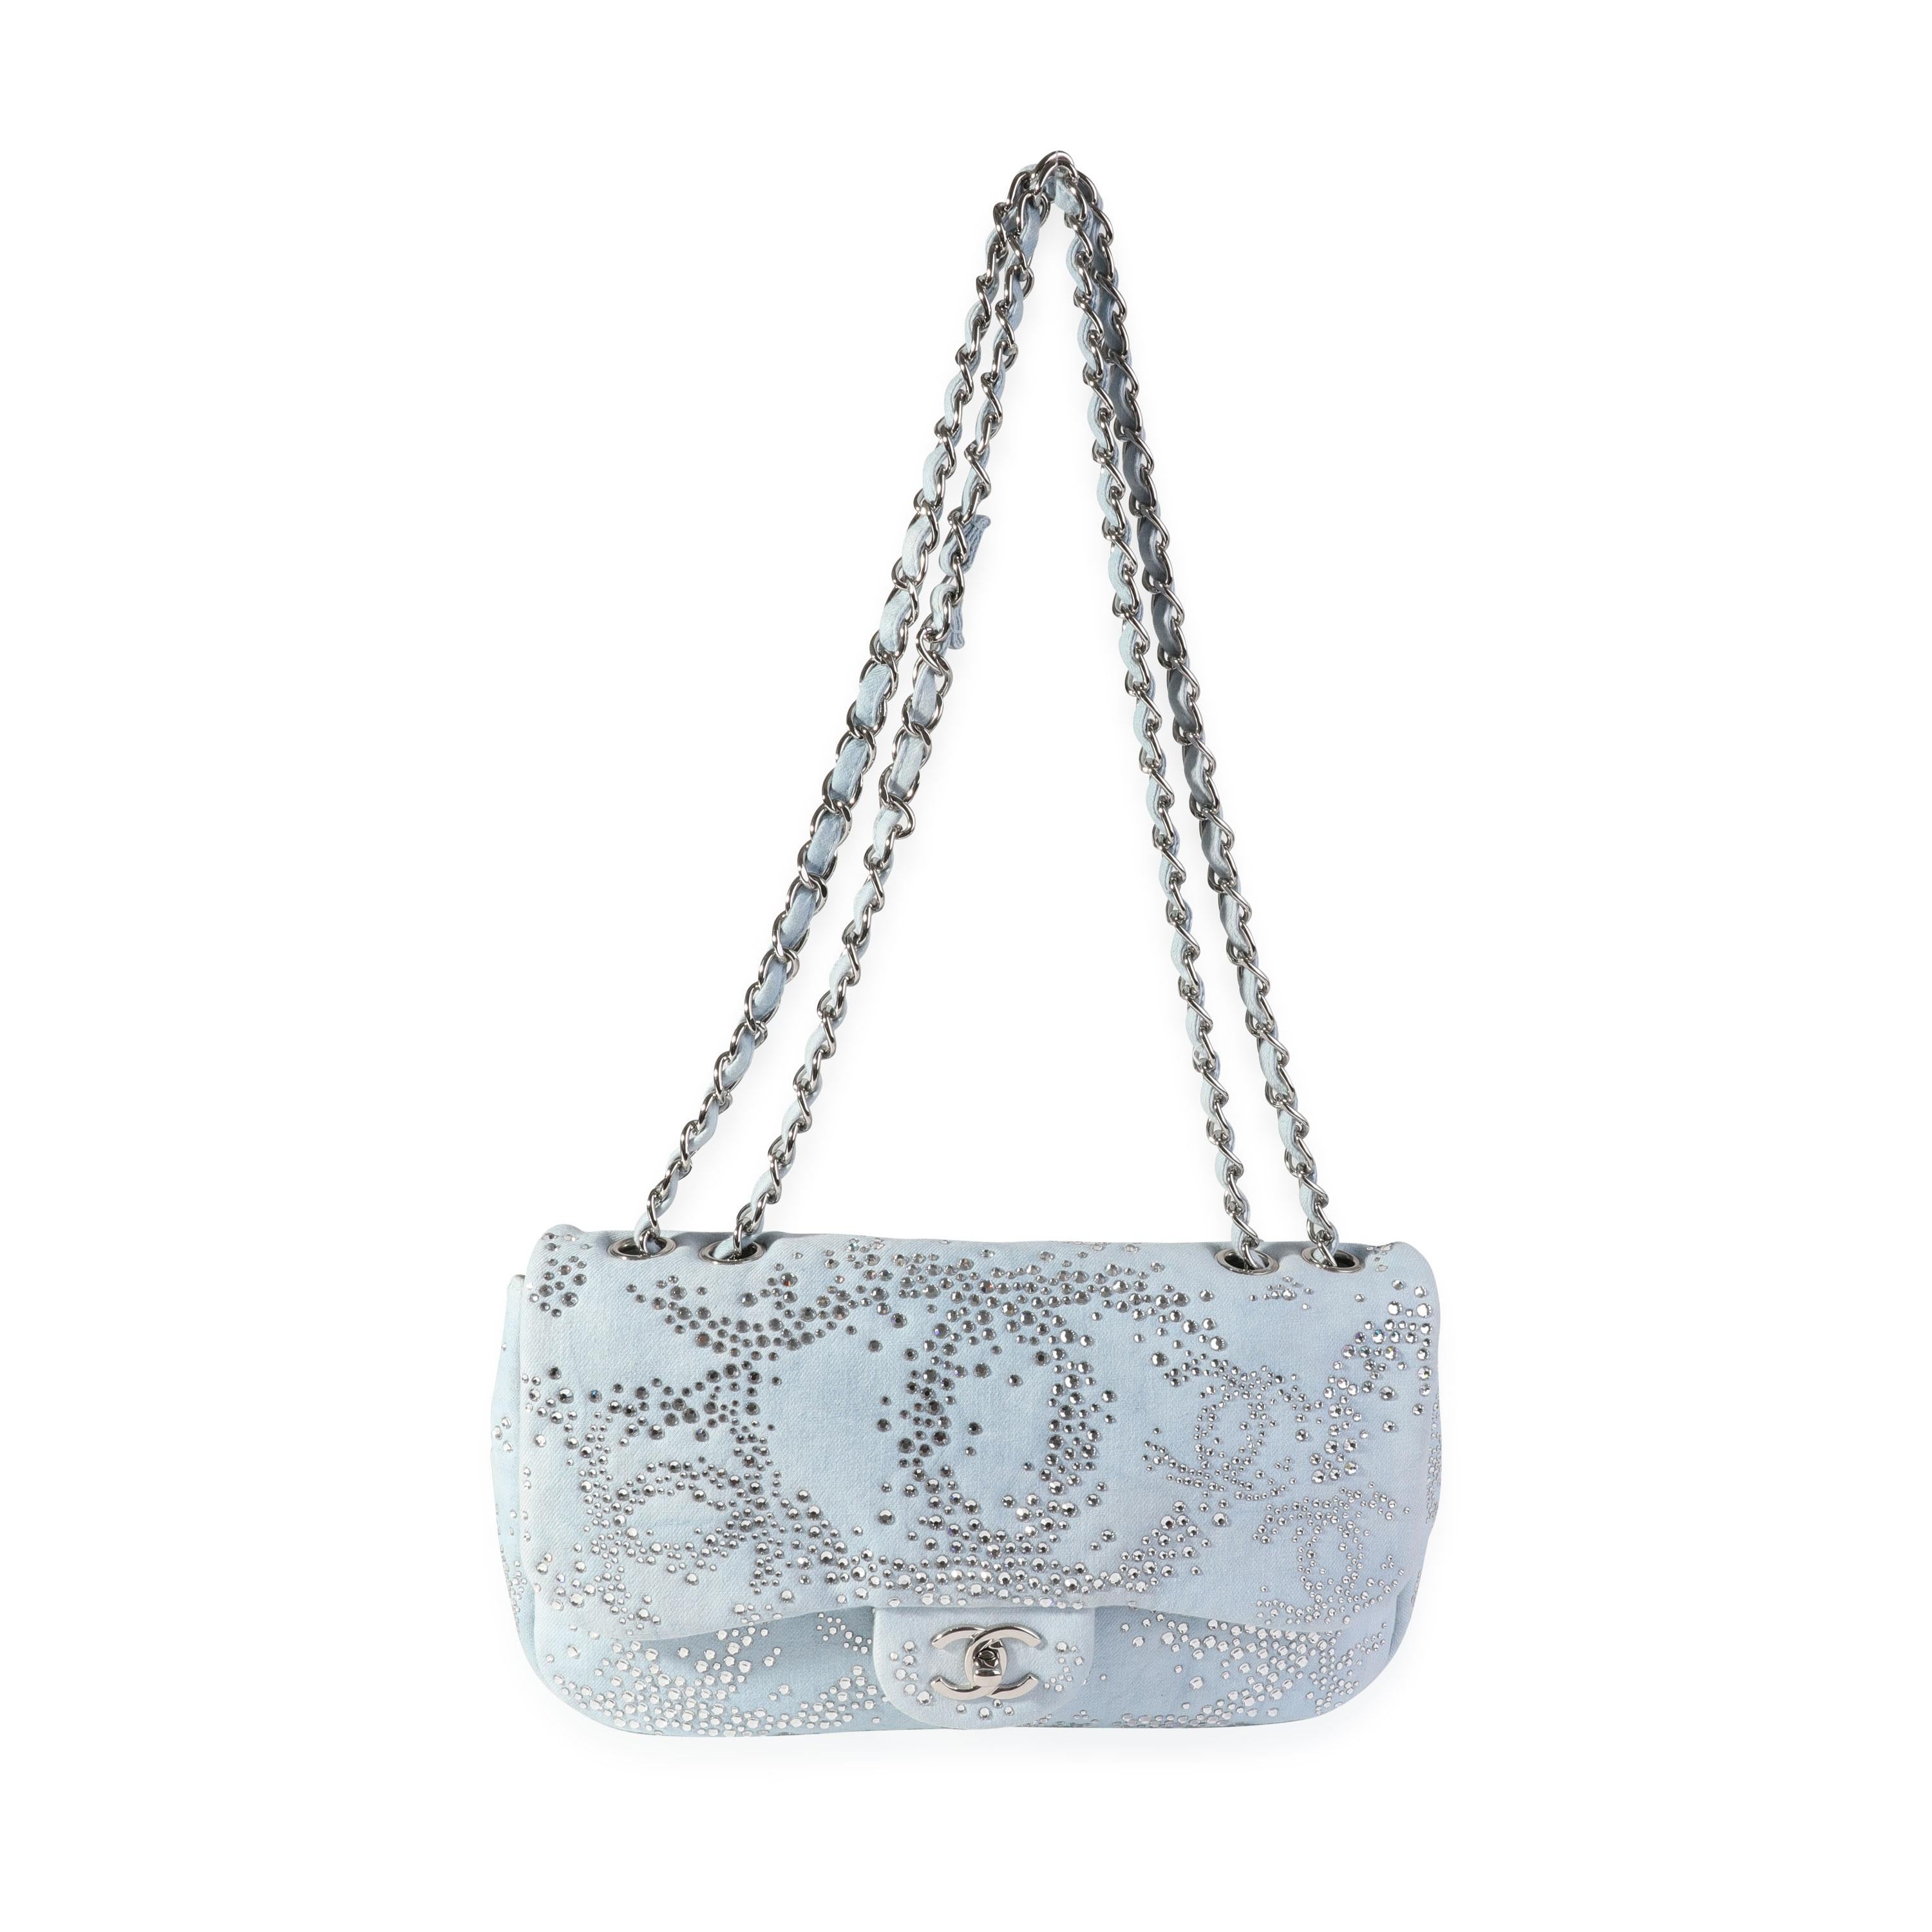 Listing Title: Chanel Light Blue Quilted Denim Swarovski Crystal Single Flap Bag
SKU: 118468
Condition: Pre-owned (3000)
Handbag Condition: Very Good
Condition Comments: Very Good Condition. Discoloration and light glue residue throughout exterior